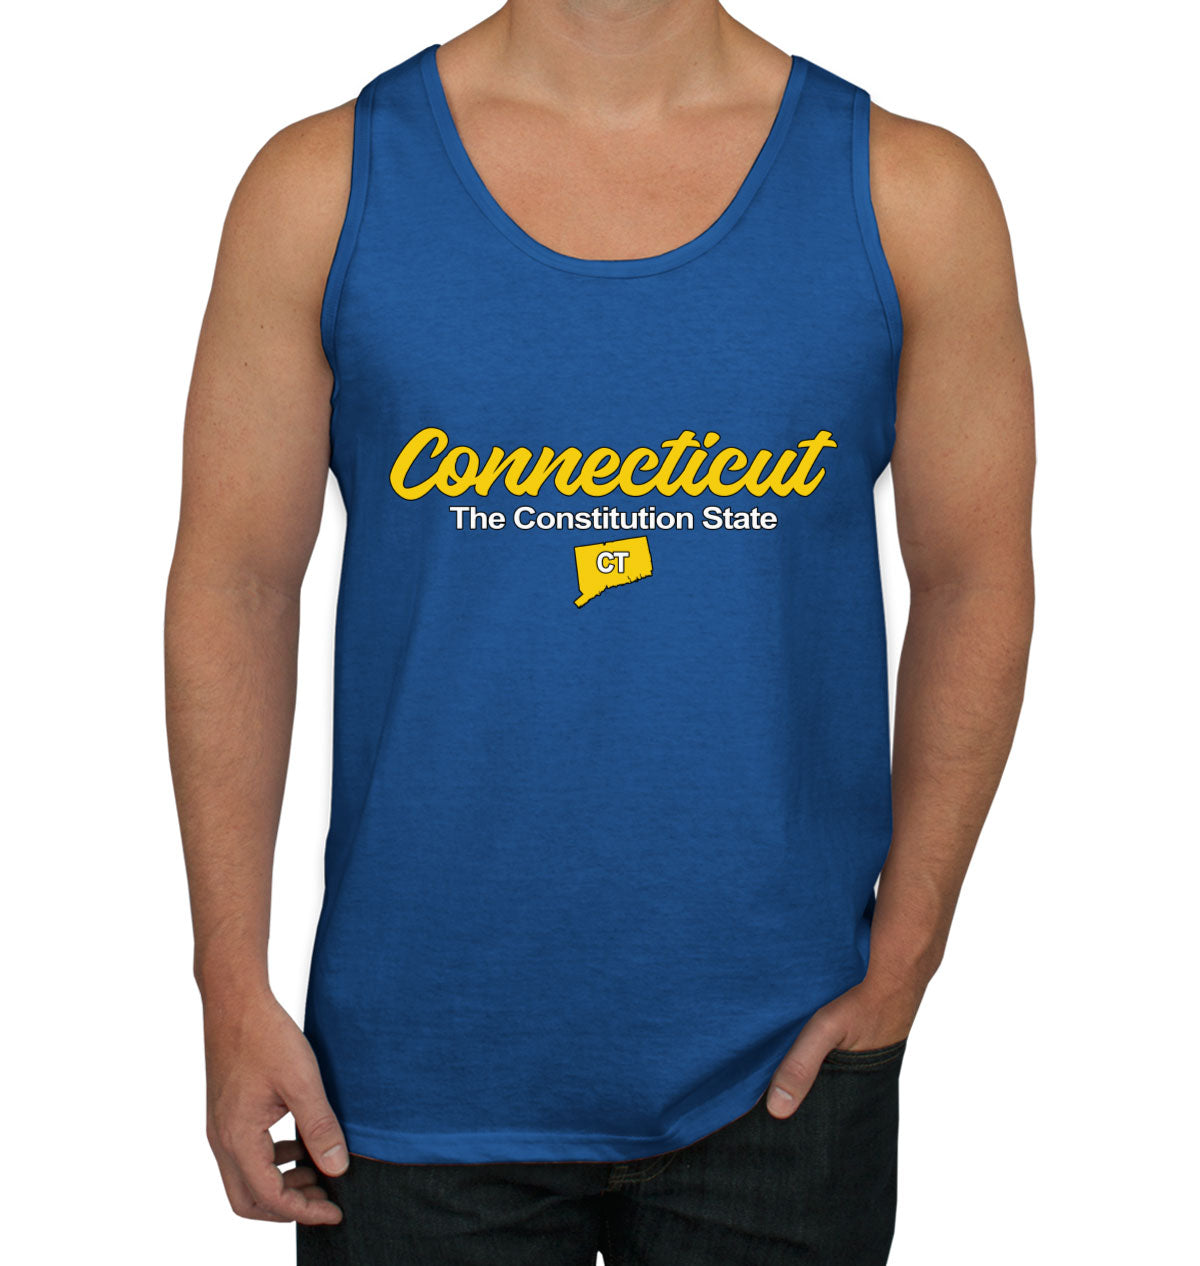 Connecticut The Constitution State Men's Tank Top